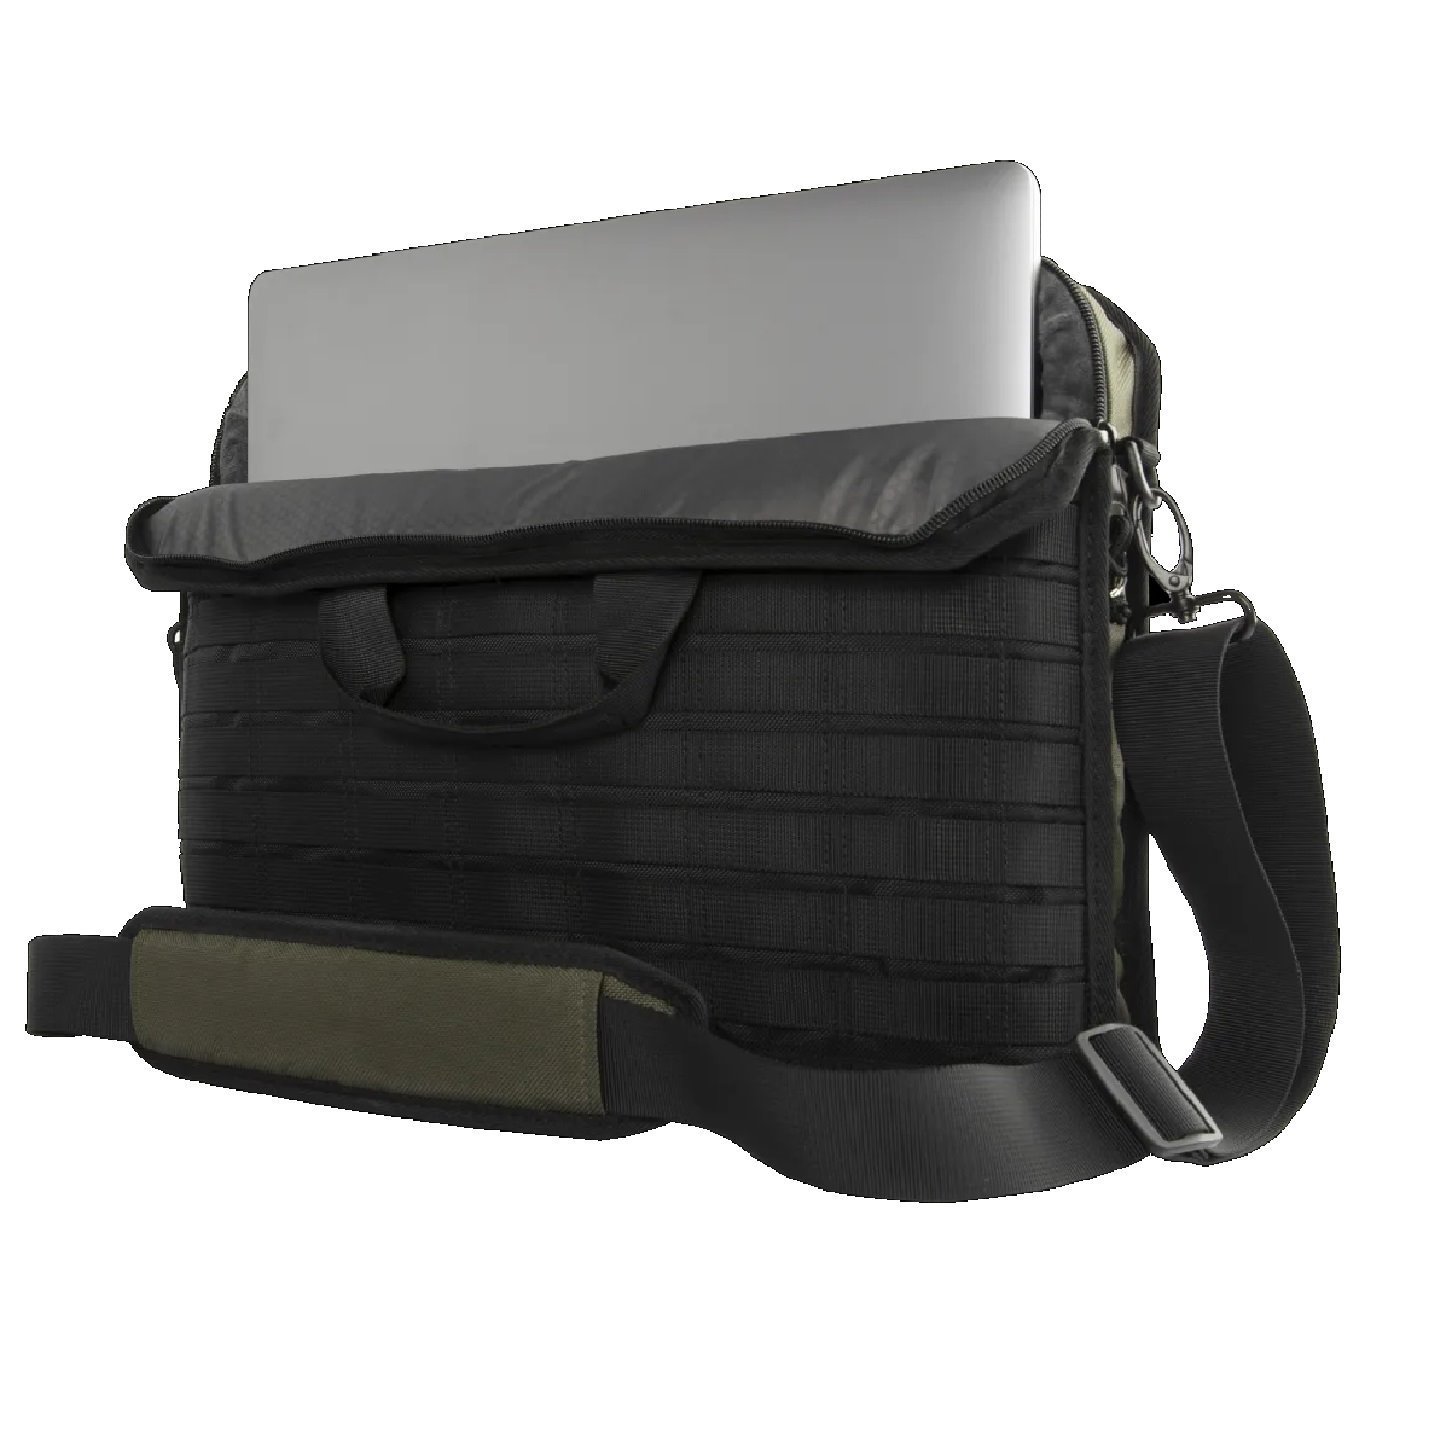 Uag Small Tactical Brief - Fits Up To 14 Devices - Olive (982410117272), Drop+ Military Standard, Detachable Shoulder Strap, Dual Layer Protection